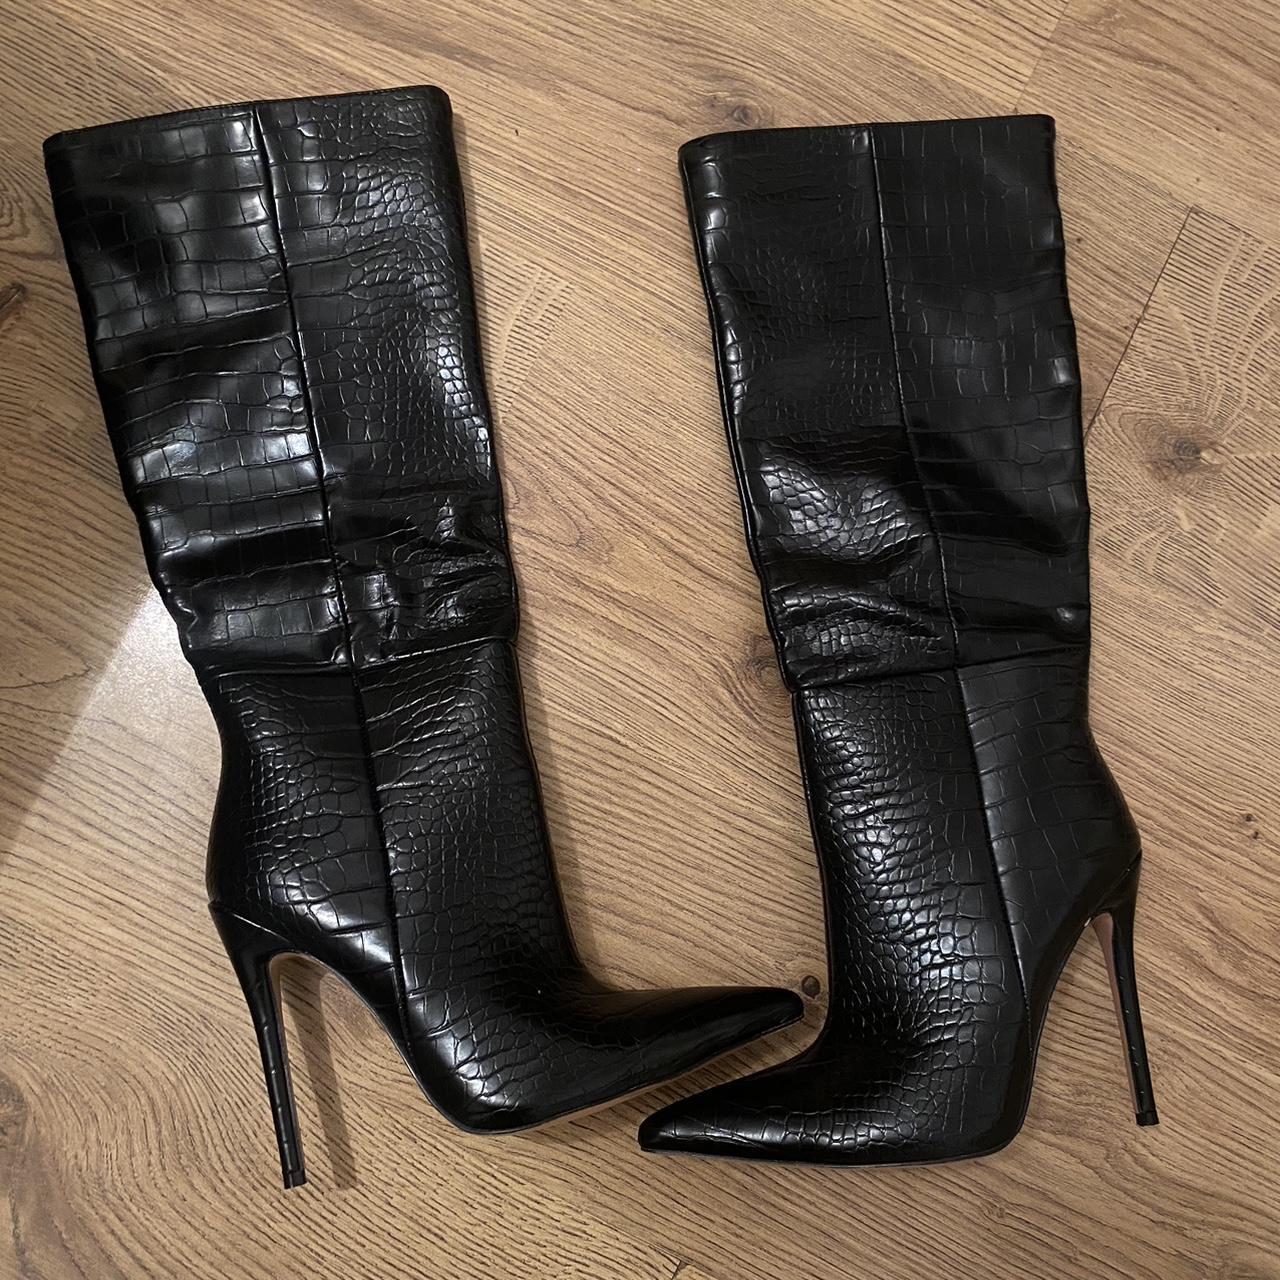 Leather Look Croc Print Pointed Heeled Boots Never... - Depop